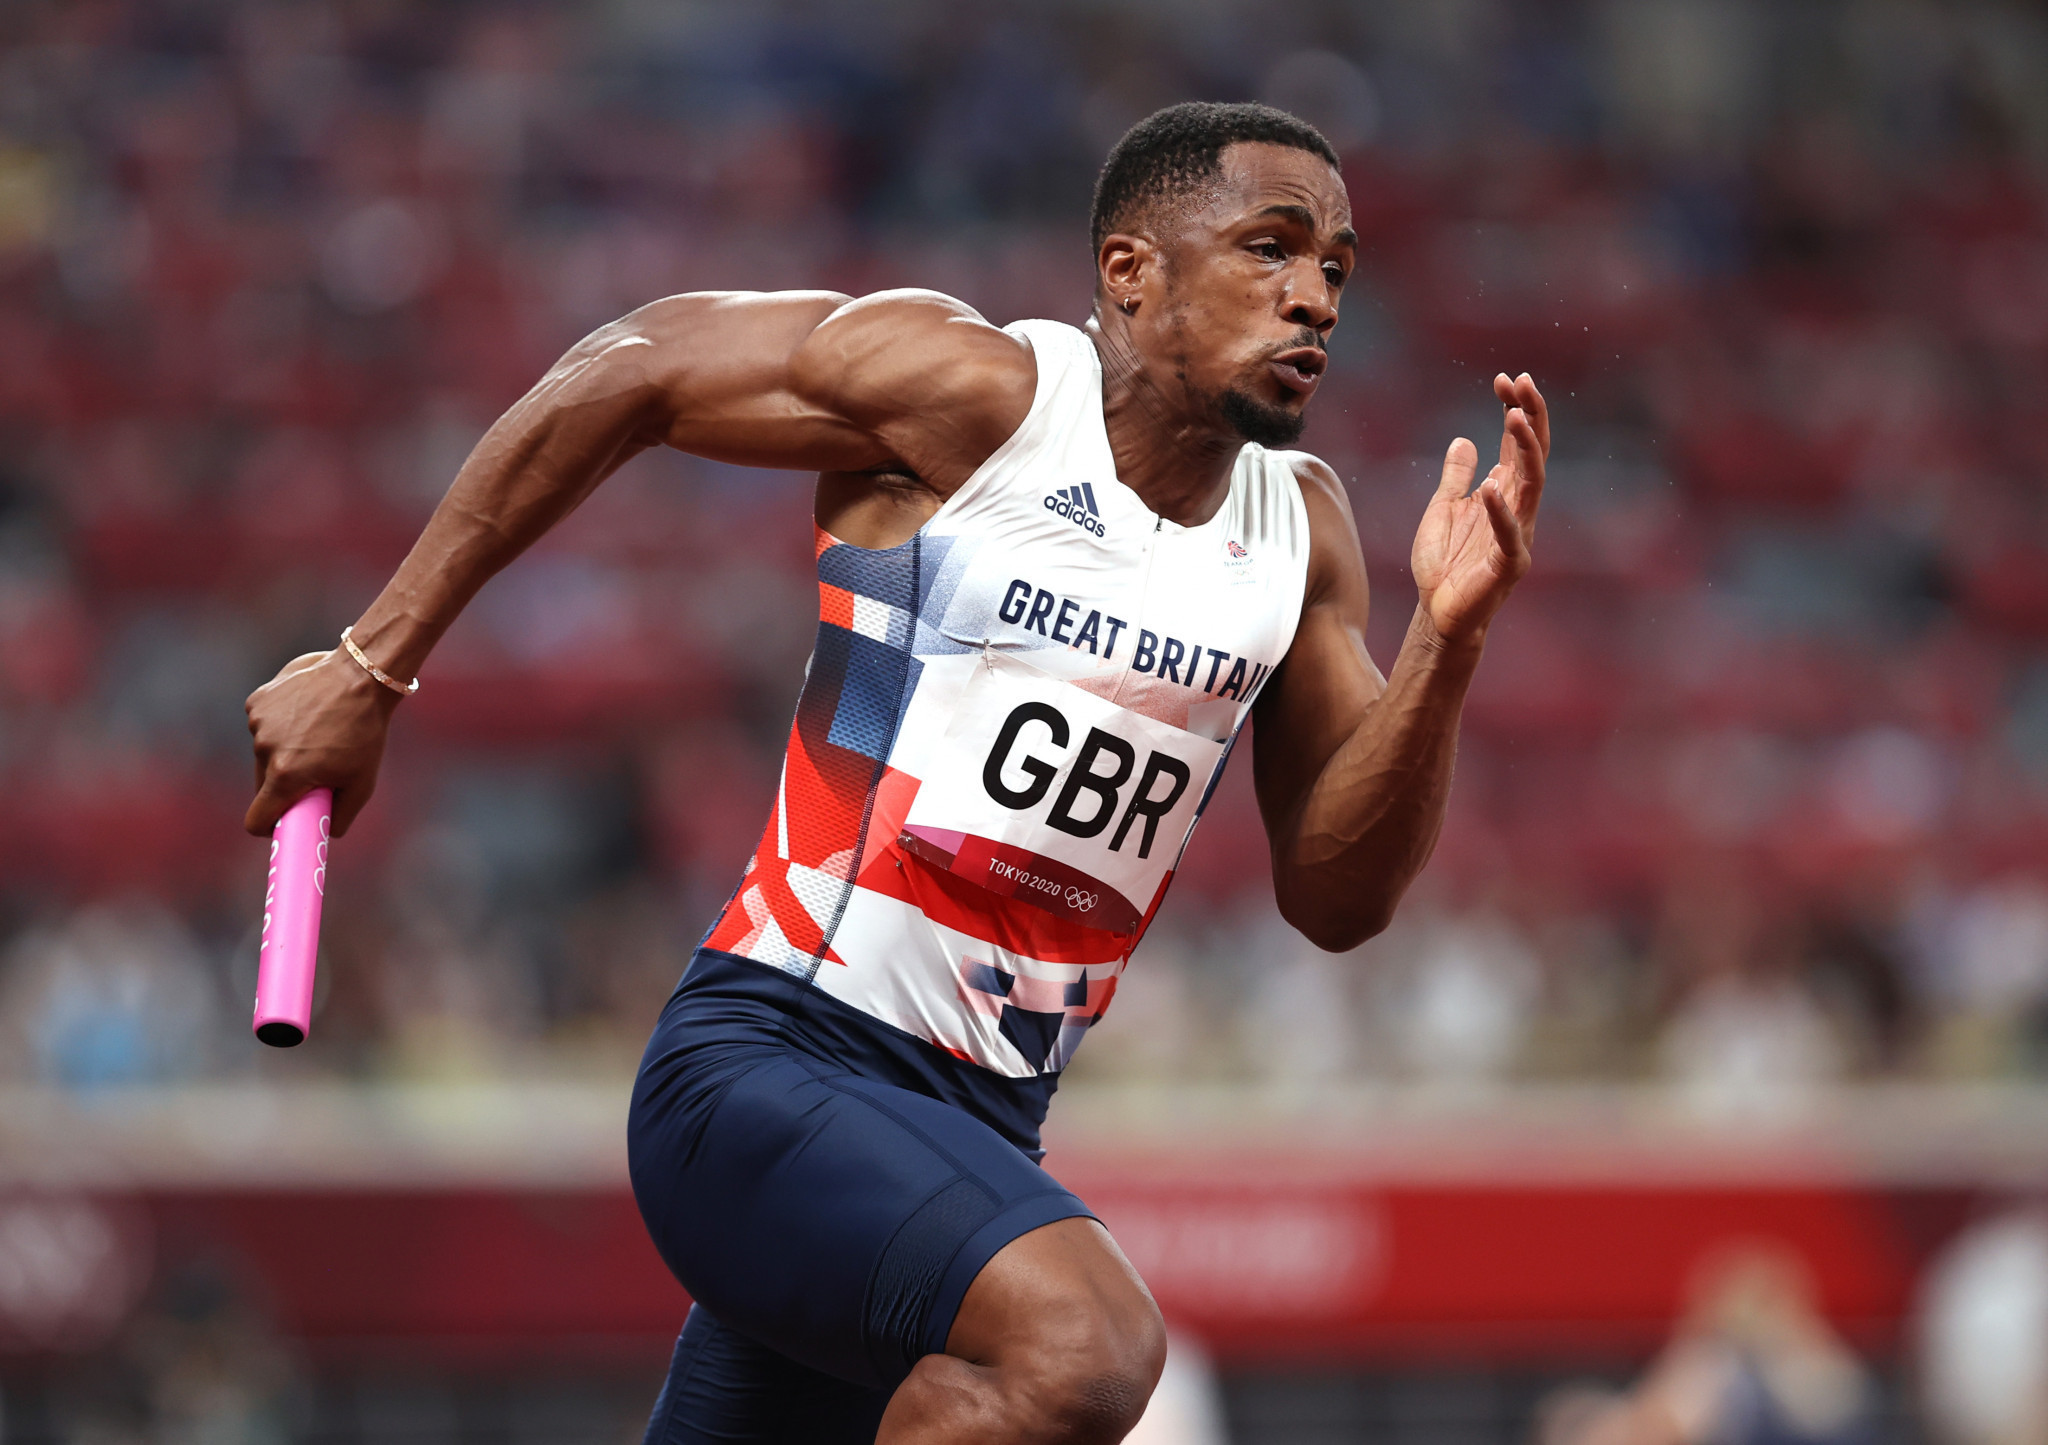 CJ Ujah failed a drugs test at Tokyo 2020 ©Getty Images